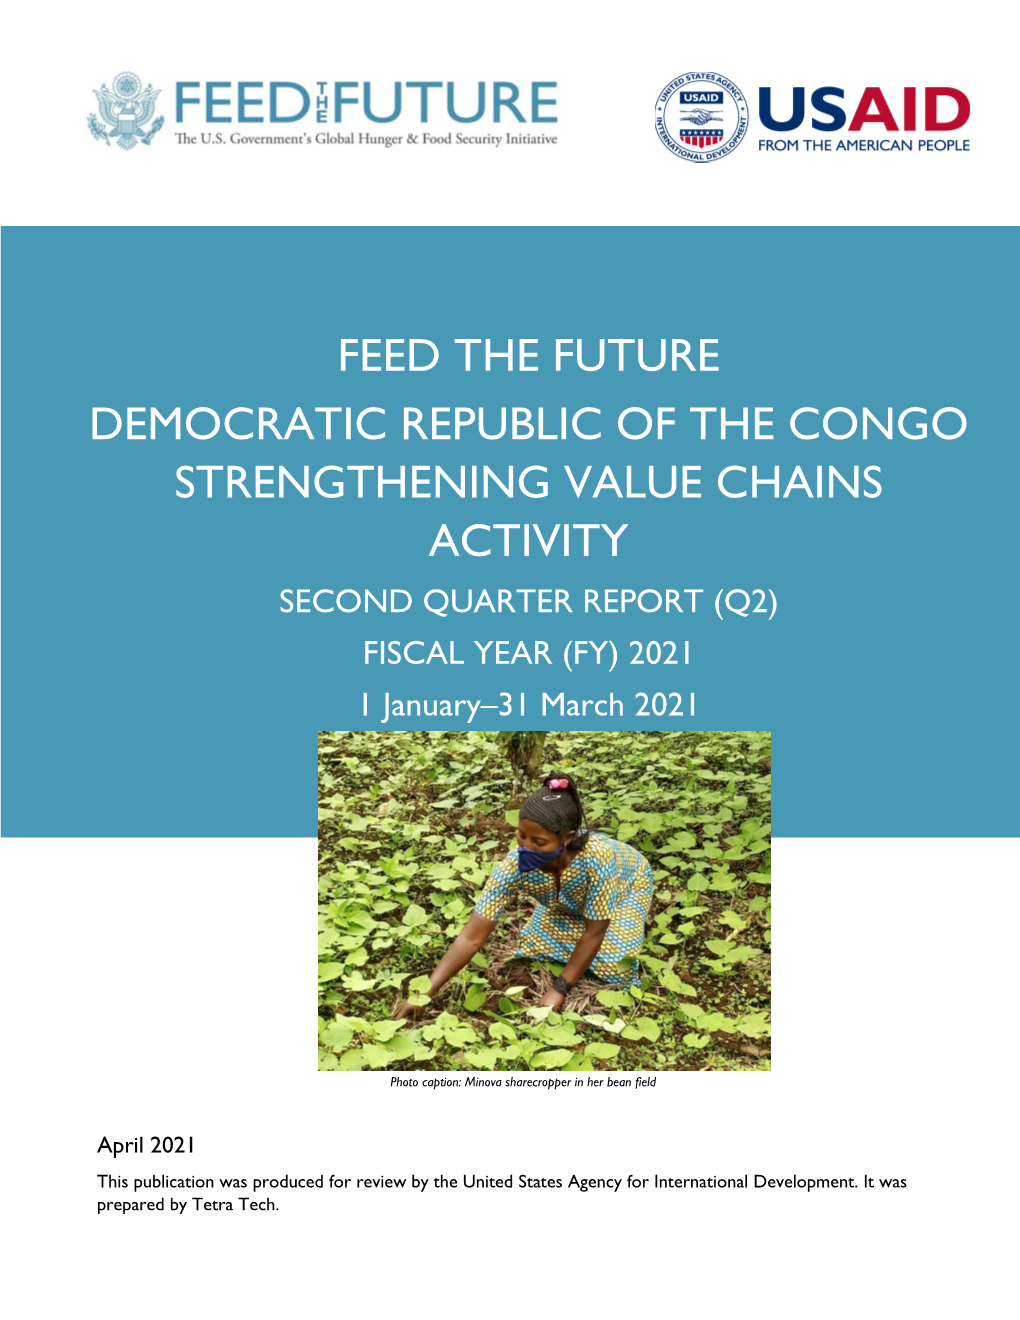 Feed the Future Democractic Republic of the Congo Strengthening Value Chains Activity